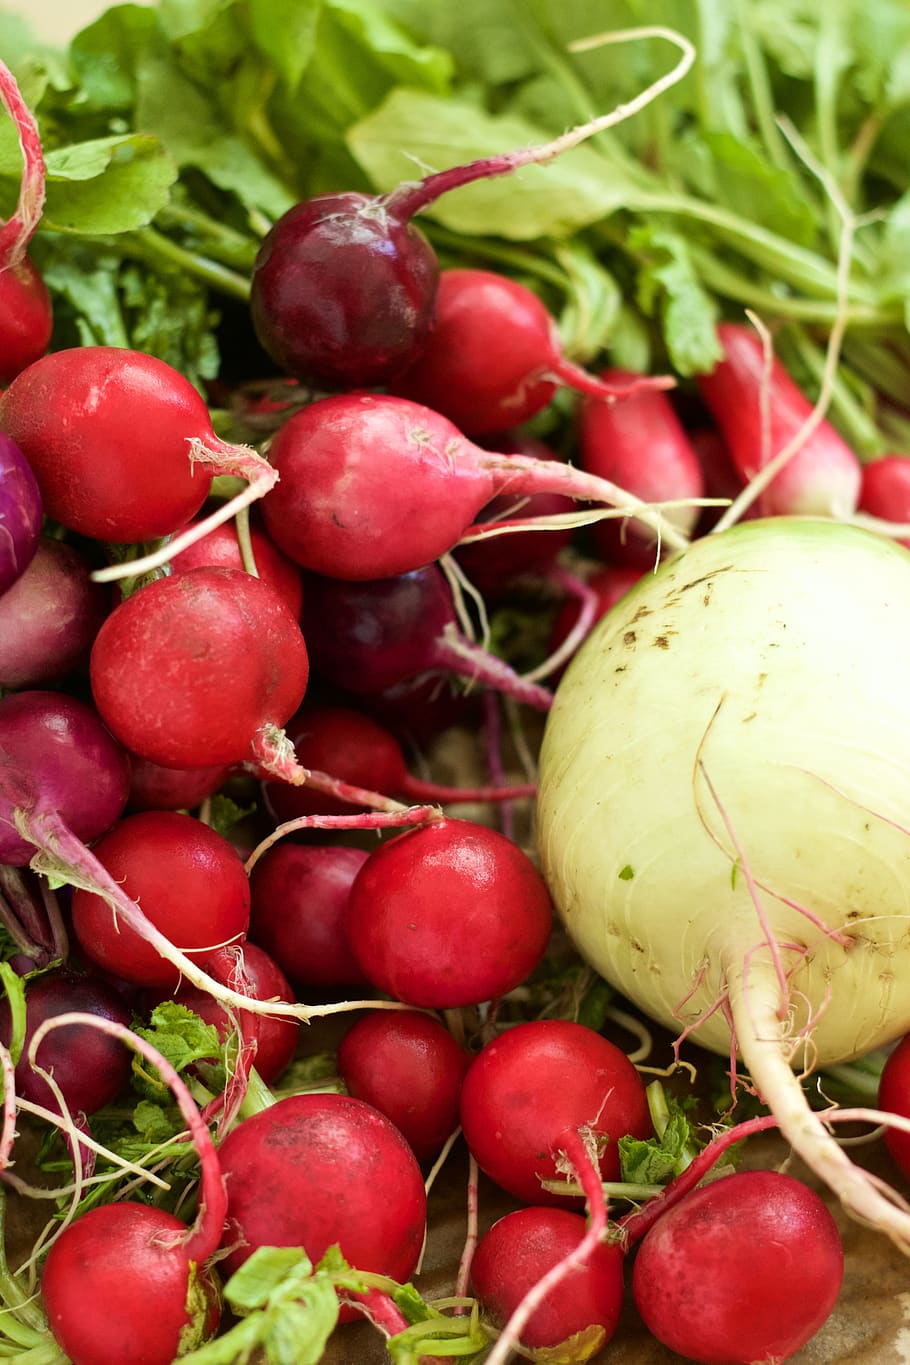 radish, red, vegetable, food and drink, healthy eating, food, wellbeing, freshness, fruit, large group of objects